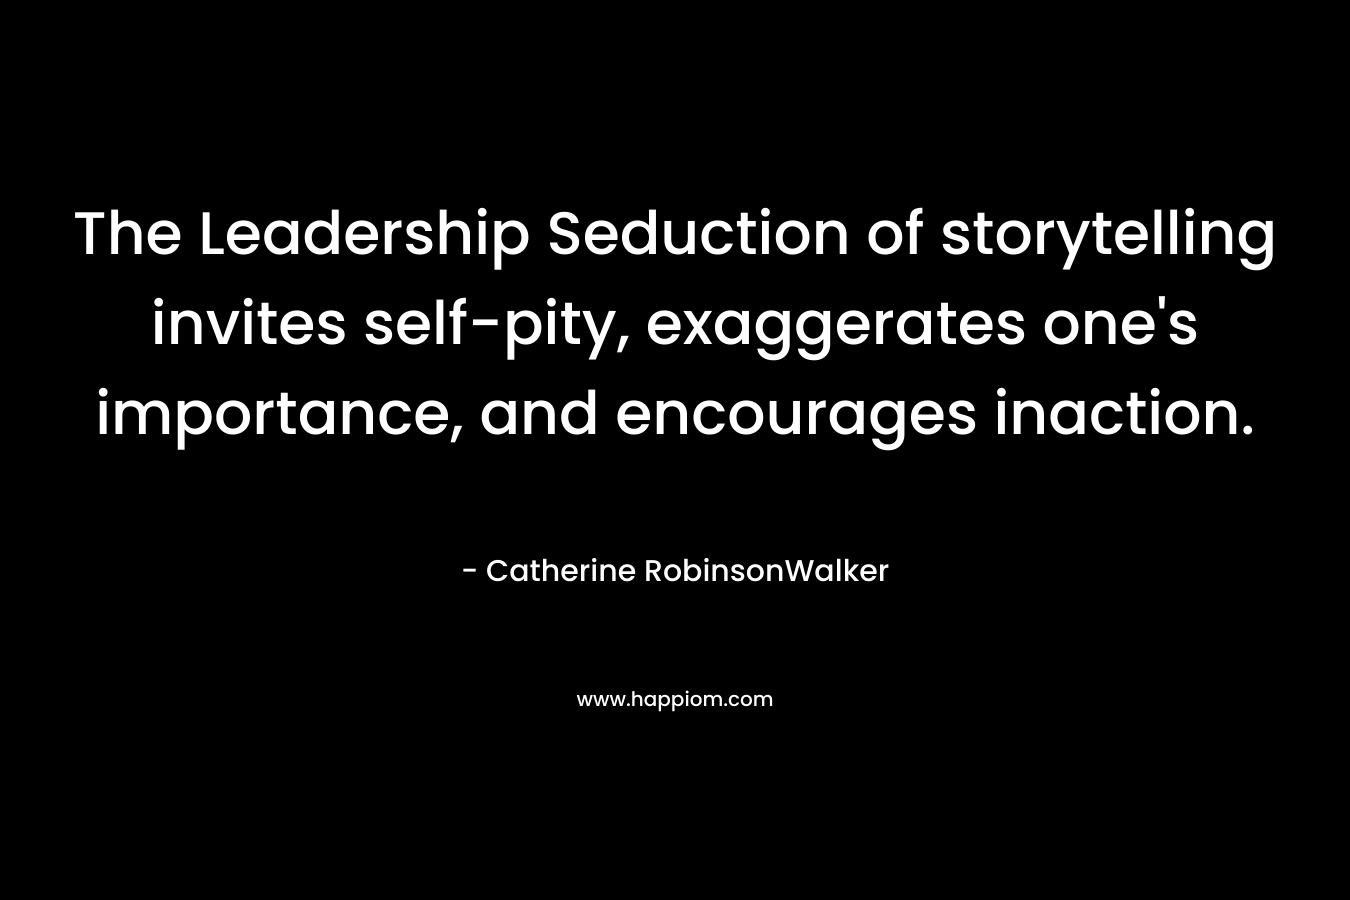 The Leadership Seduction of storytelling invites self-pity, exaggerates one’s importance, and encourages inaction. – Catherine RobinsonWalker